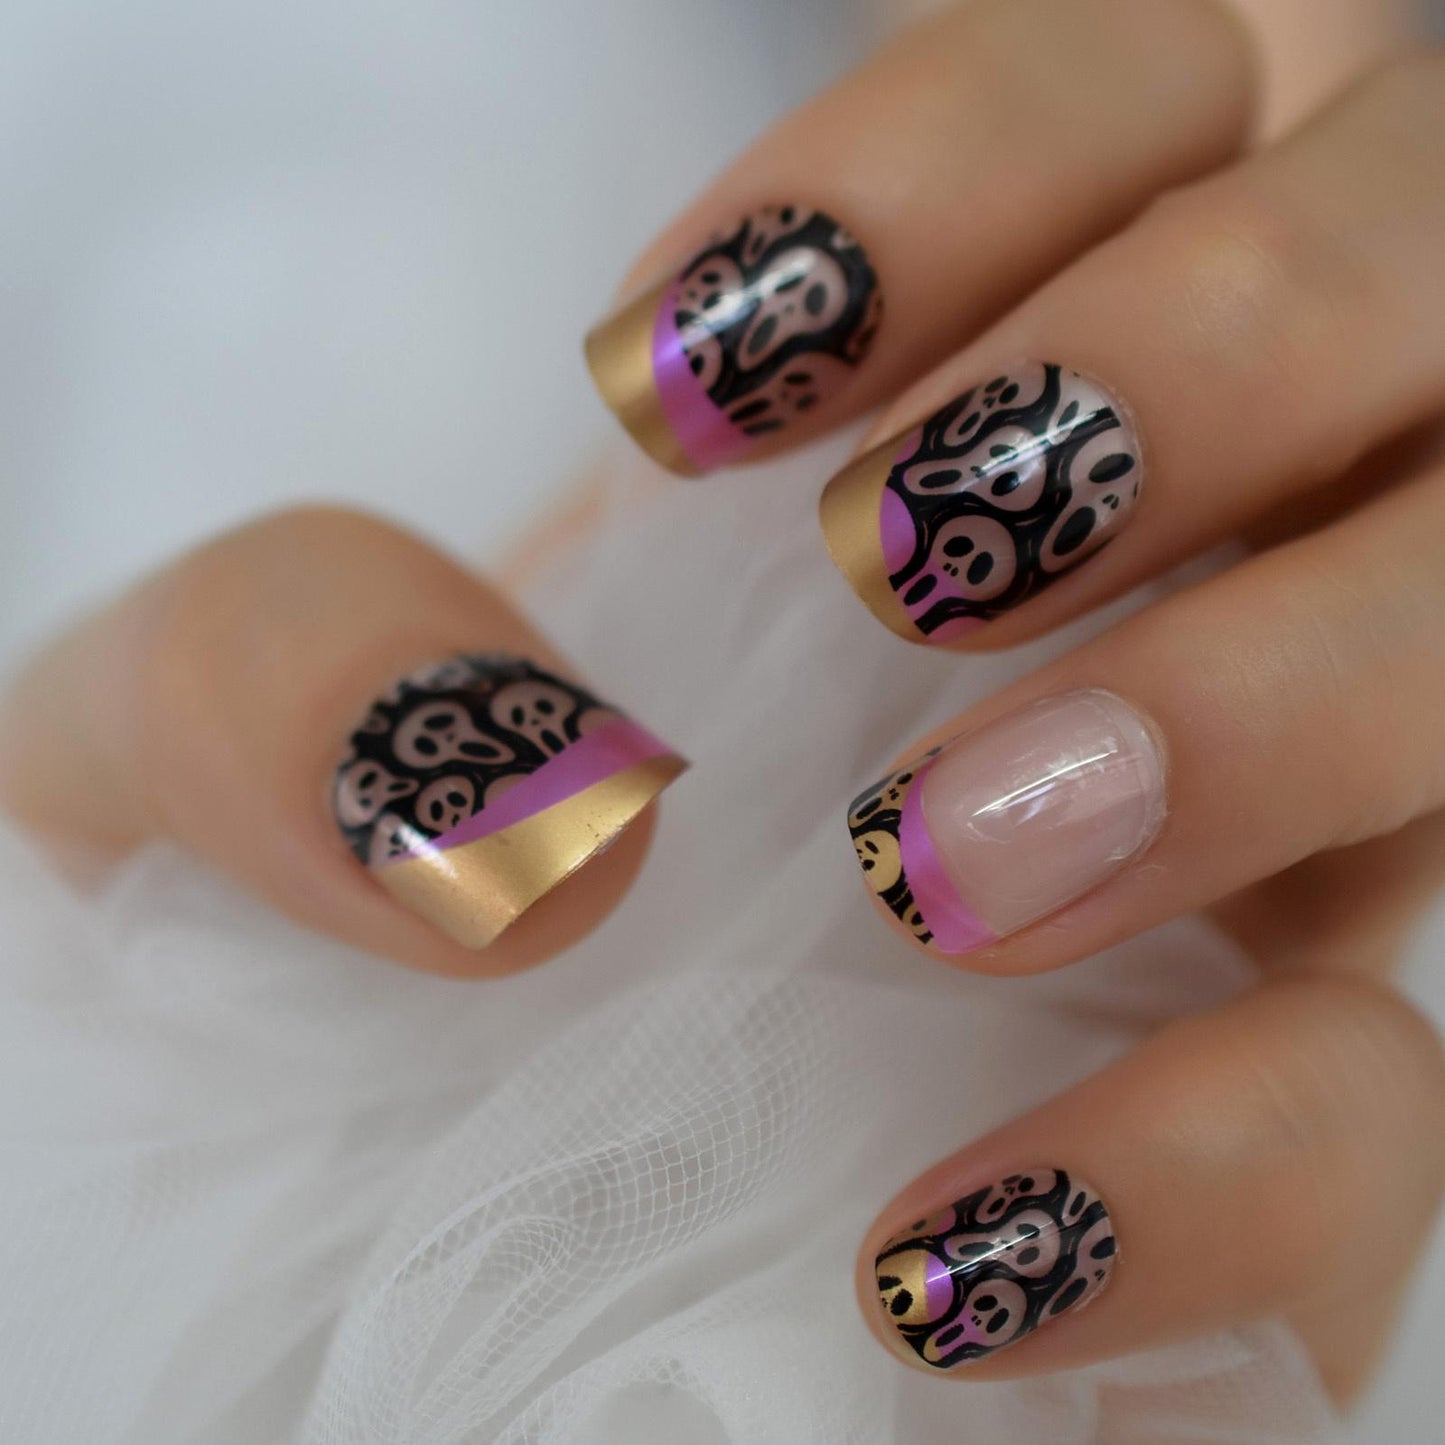 Nude Clear Nails With Skull Print